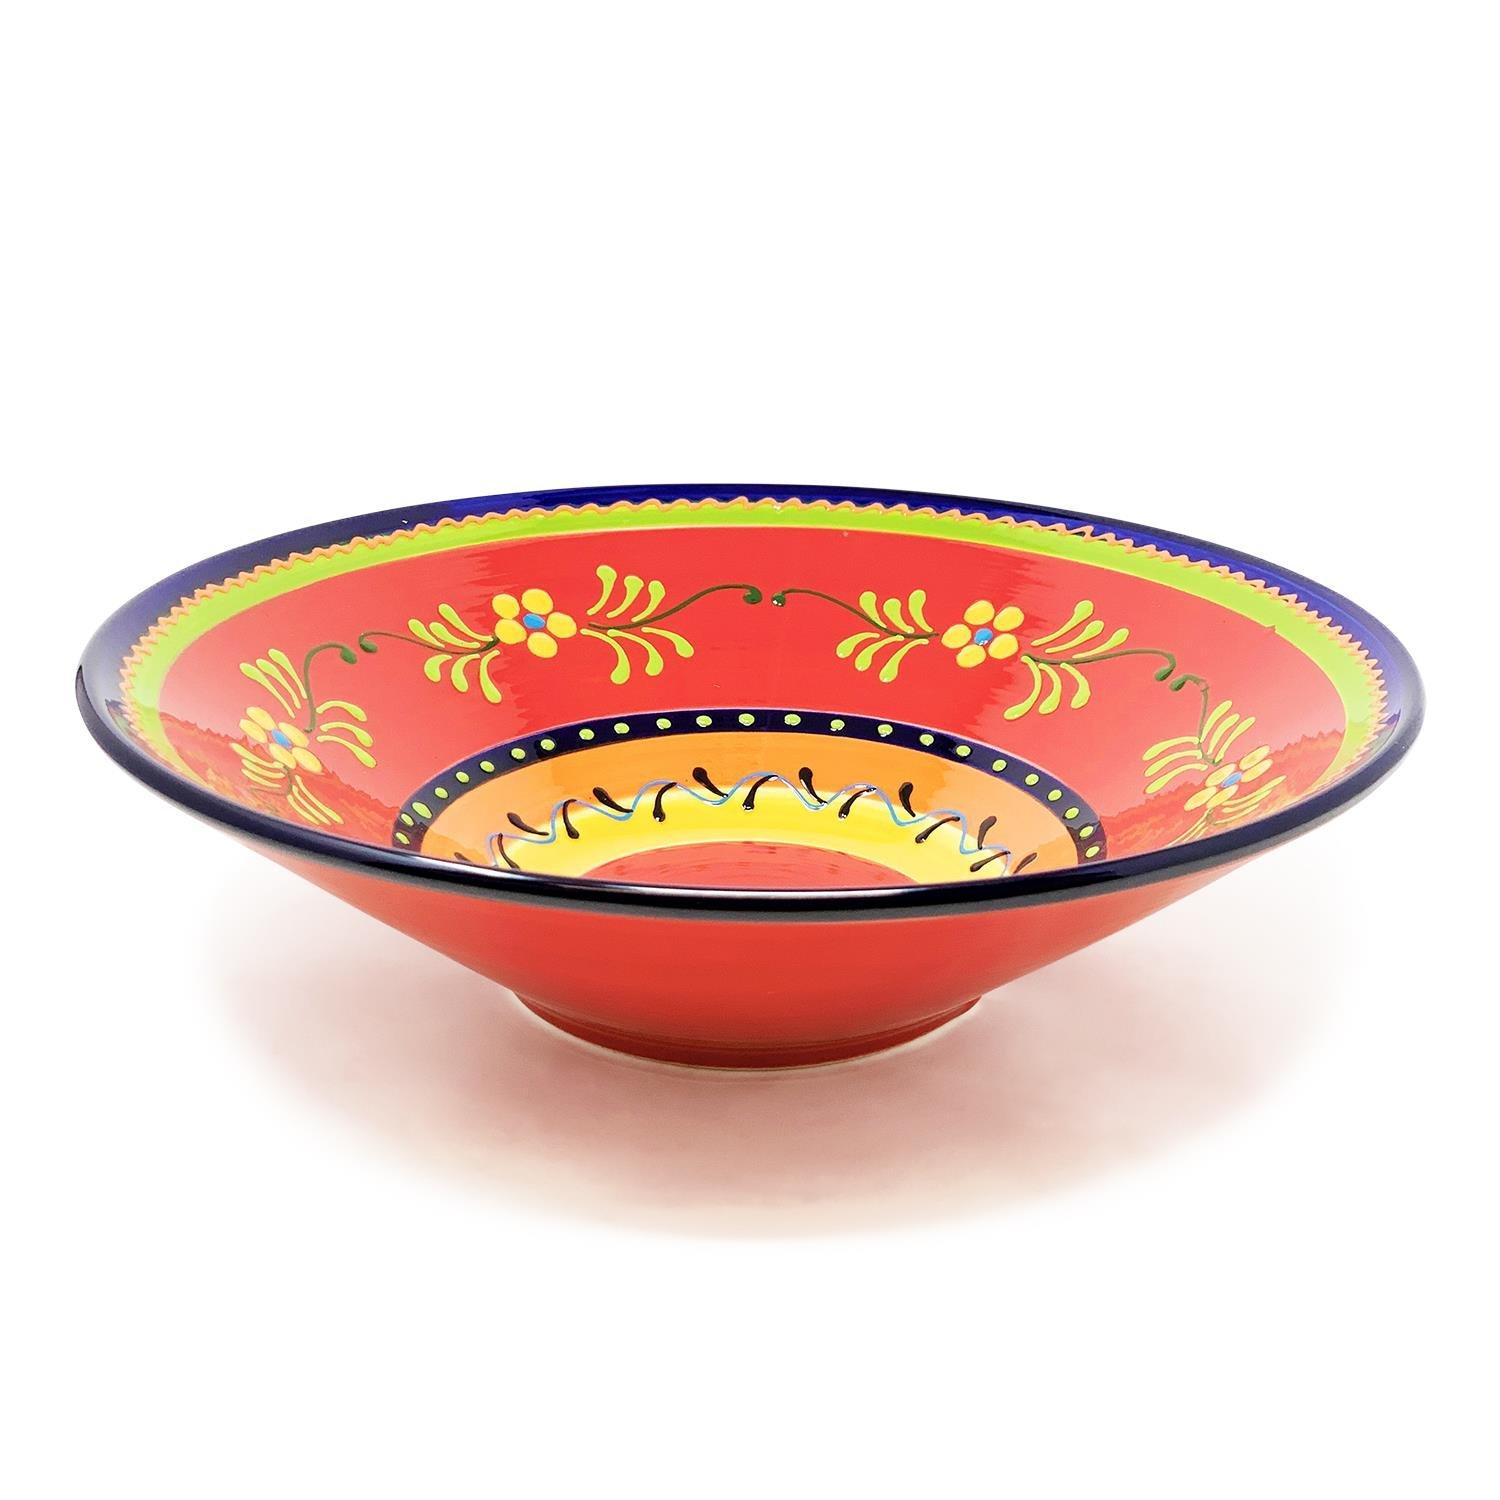 Classic Spanish Hand Painted Kitchen Dining Extra Large Conical Bowl 38cm Daisy Chains